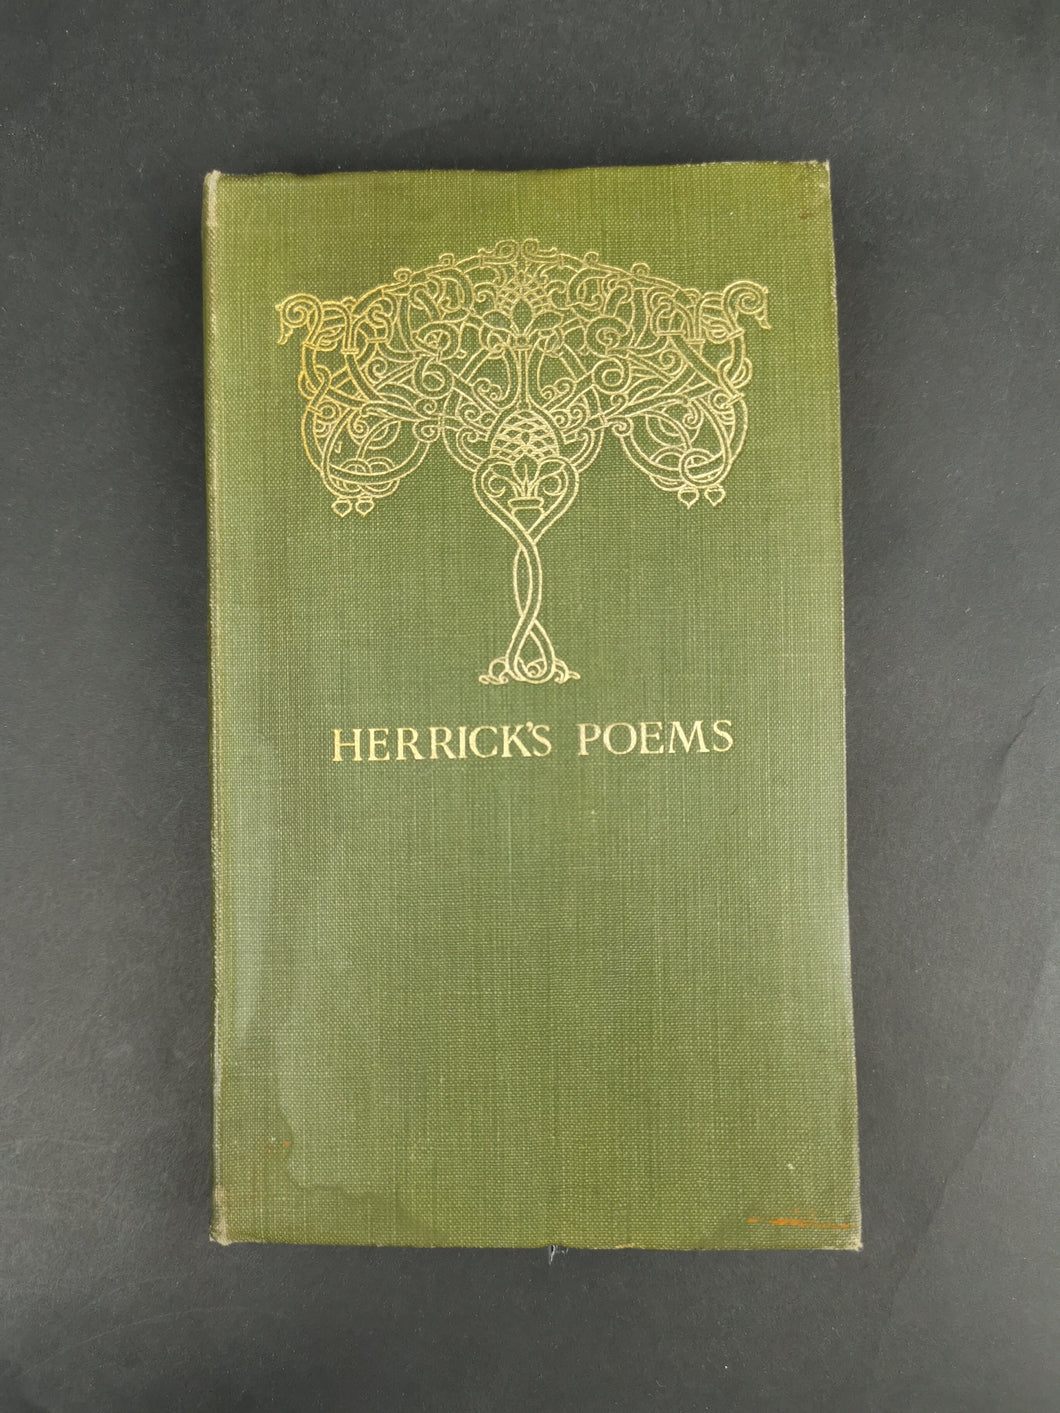 Antique Robert Herrick Herrick's Poems Poetry Book 1905 Art Nouveau Arts and Crafts Green and Gold Canvas Cover